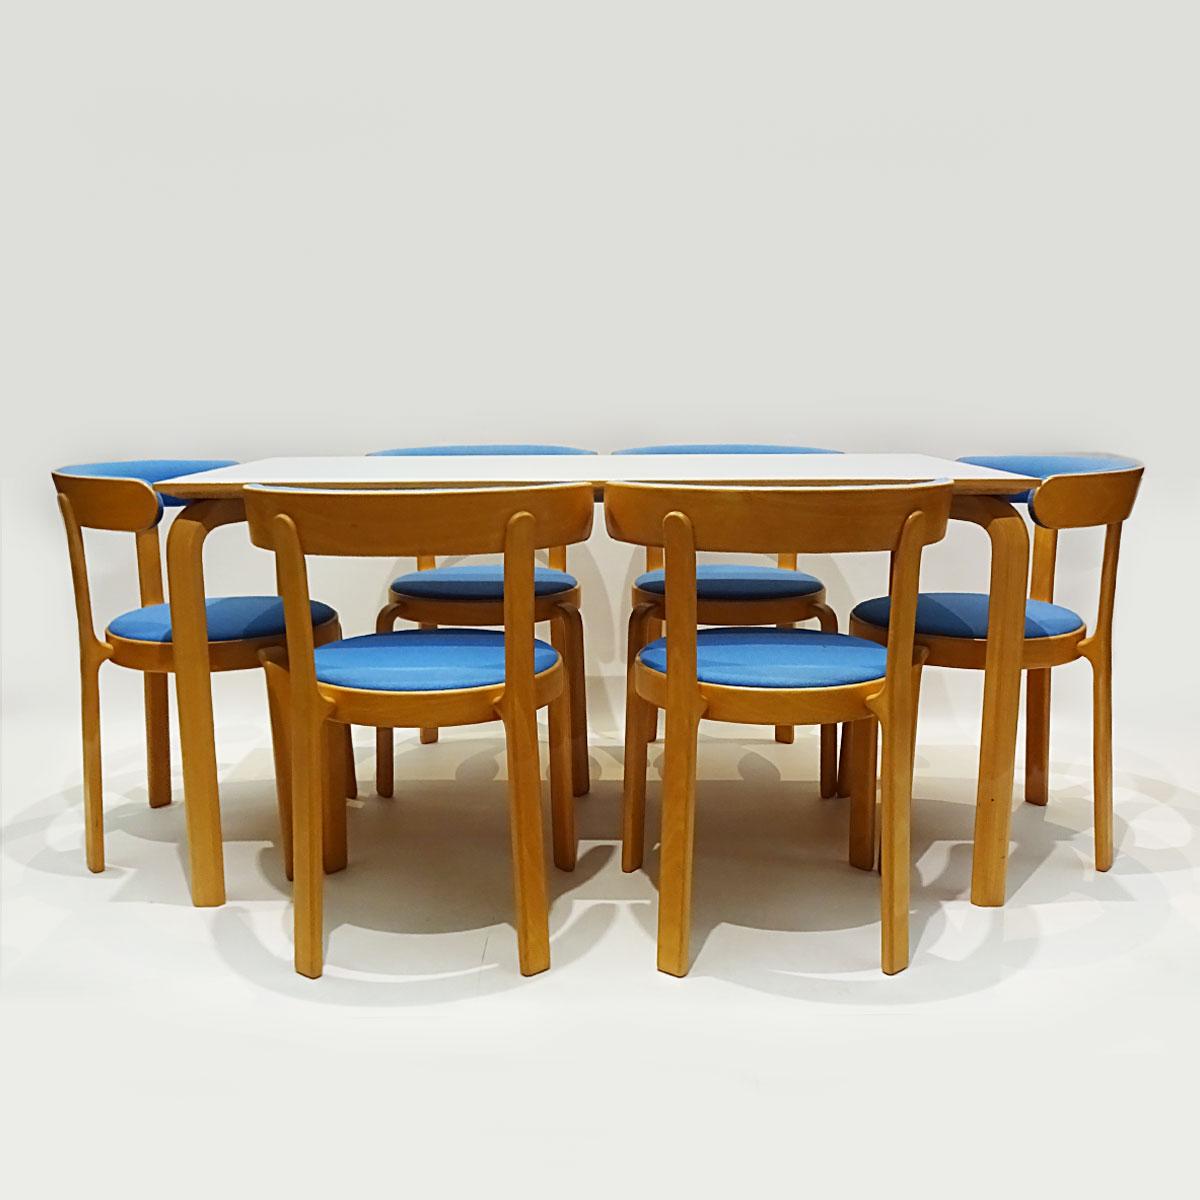 Rud Thygesen Beech Danish bentwood compact dining table and chair set in the style of Alvar Aalto

A sturdy and well-made bentwood dining table with six matching chairs designed by Danish designer Rud Thygesen for Farstrup (table) and Magnus